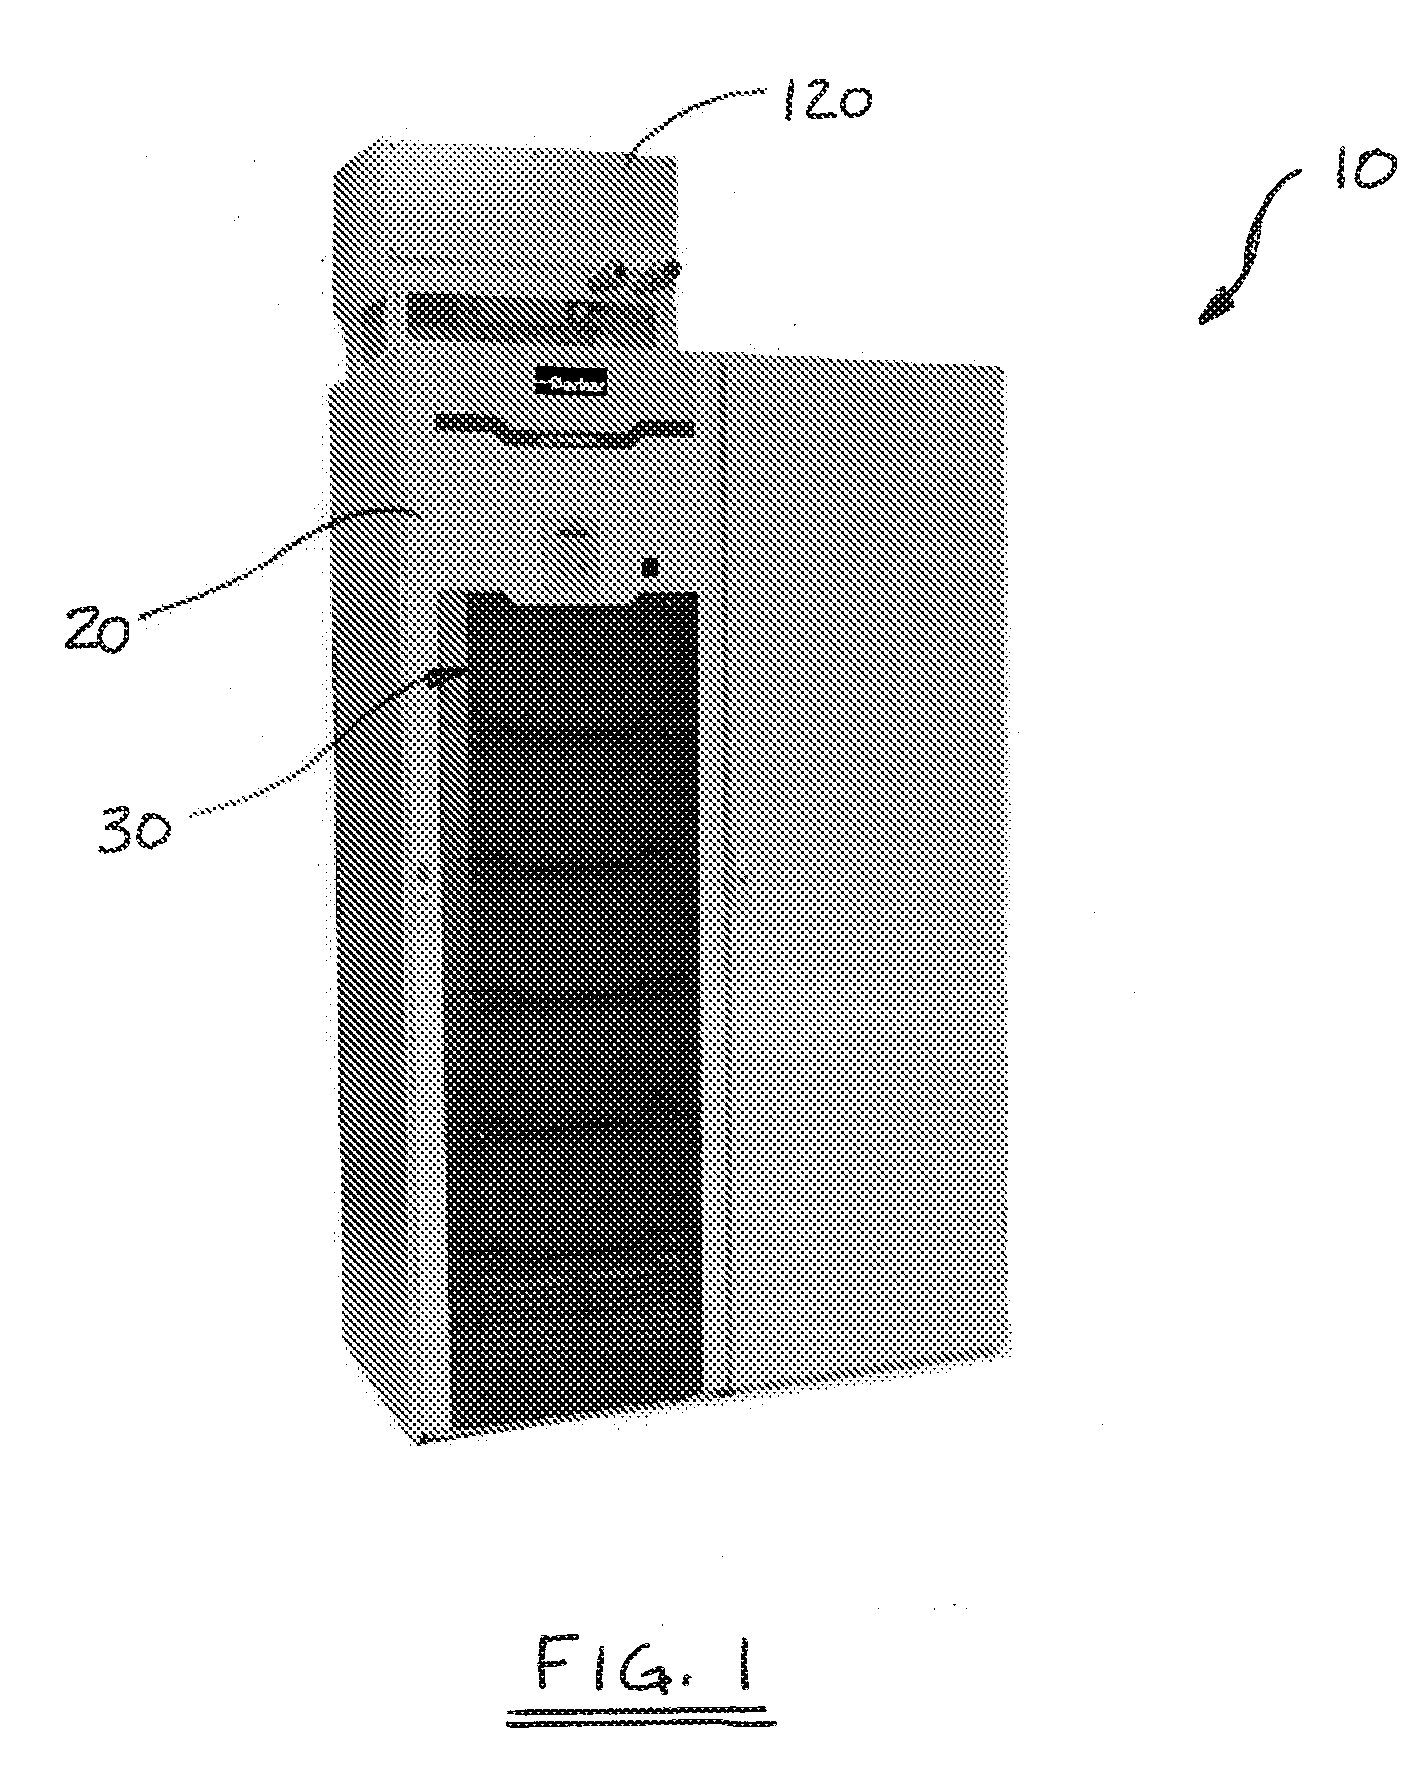 Modular high-power drive stack cooled with vaporizable dielectric fluid